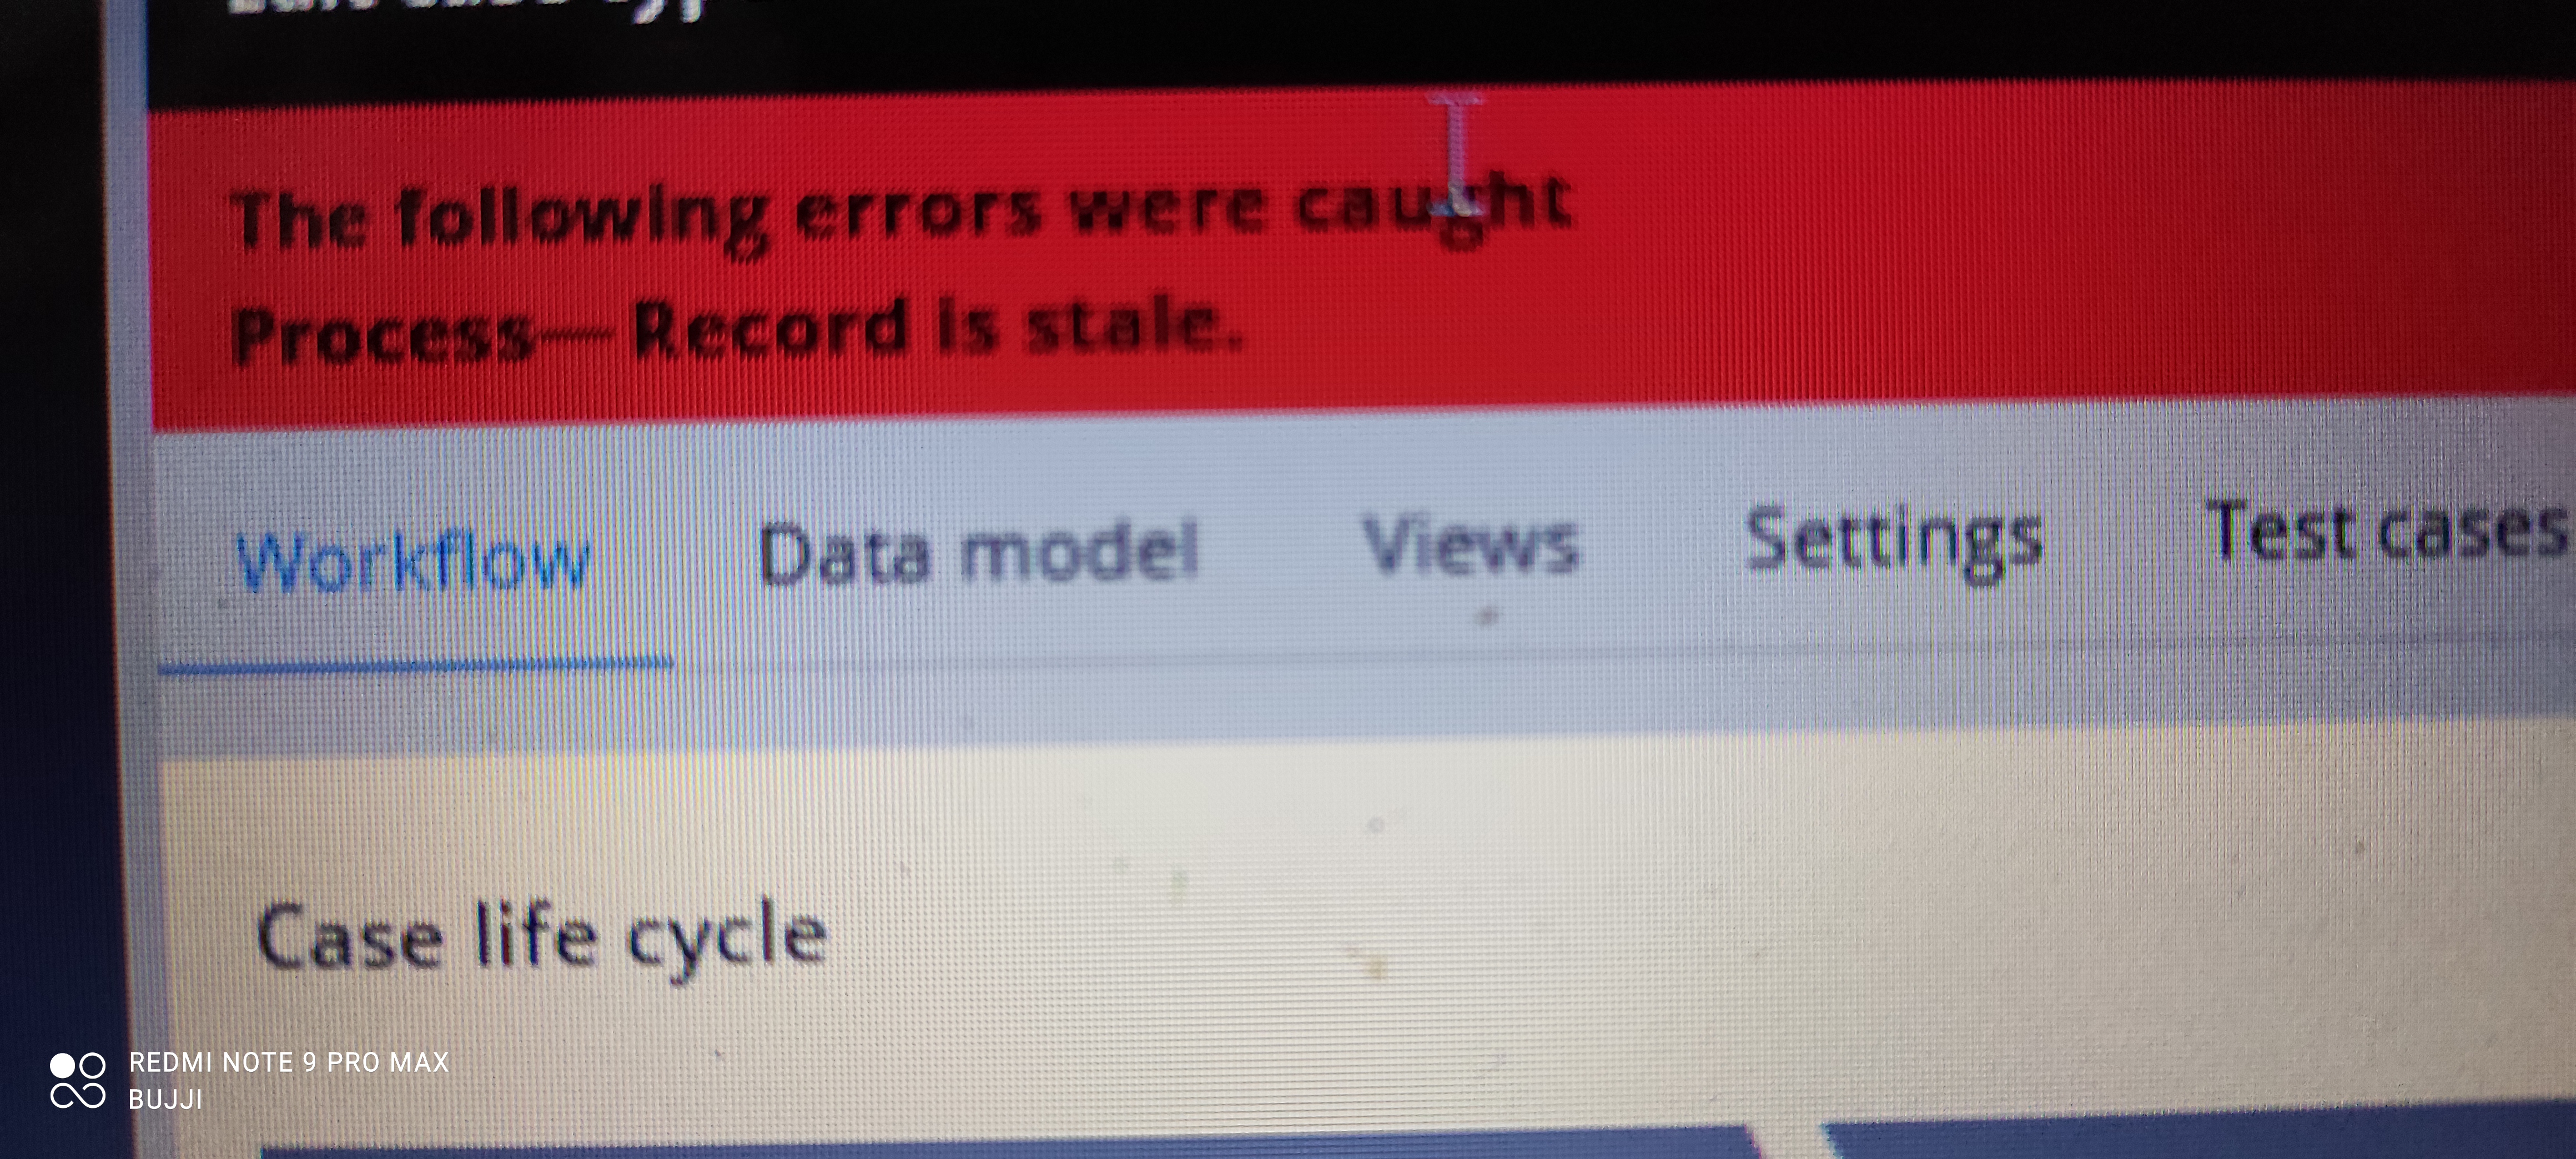 Can anyone tell the how to clear this error please